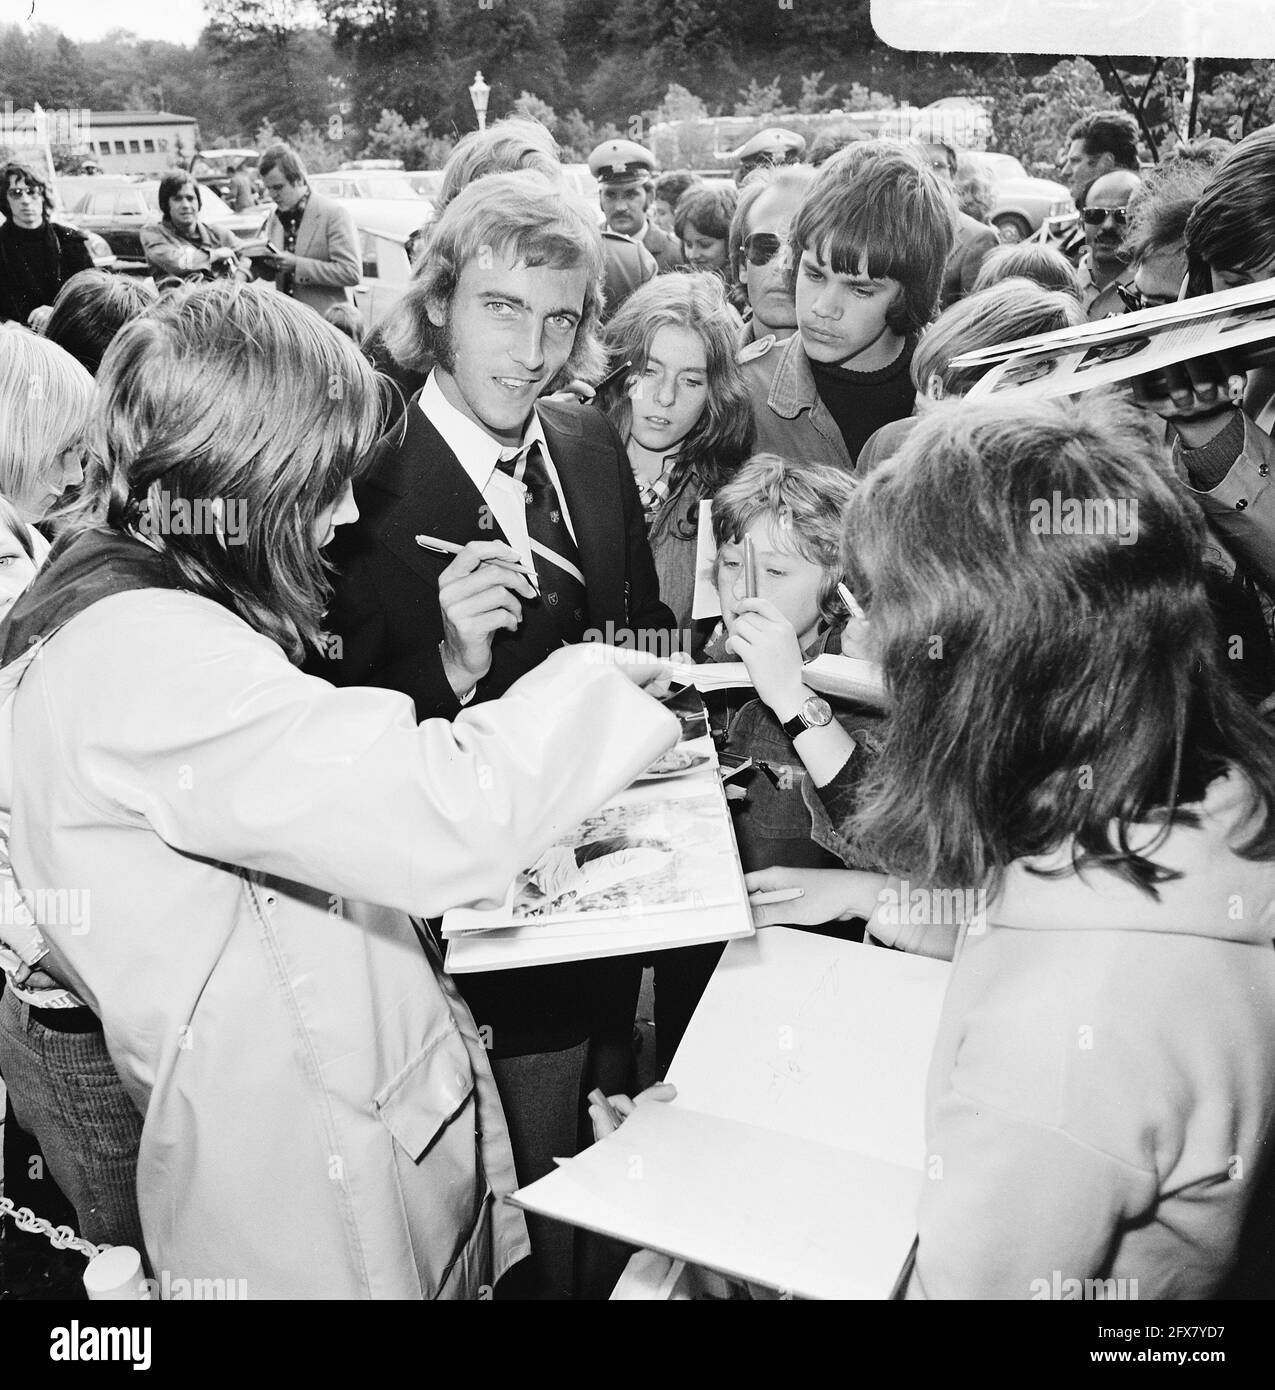 Arrival of Dutch national team in Hiltrup ( West Germany ) World Cup 1974; Johan Neeskens gives autographs, June 12, 1974, HANDSIGNALS, teams, sports, soccer, The Netherlands, 20th century press agency photo, news to remember, documentary, historic photography 1945-1990, visual stories, human history of the Twentieth Century, capturing moments in time Stock Photo